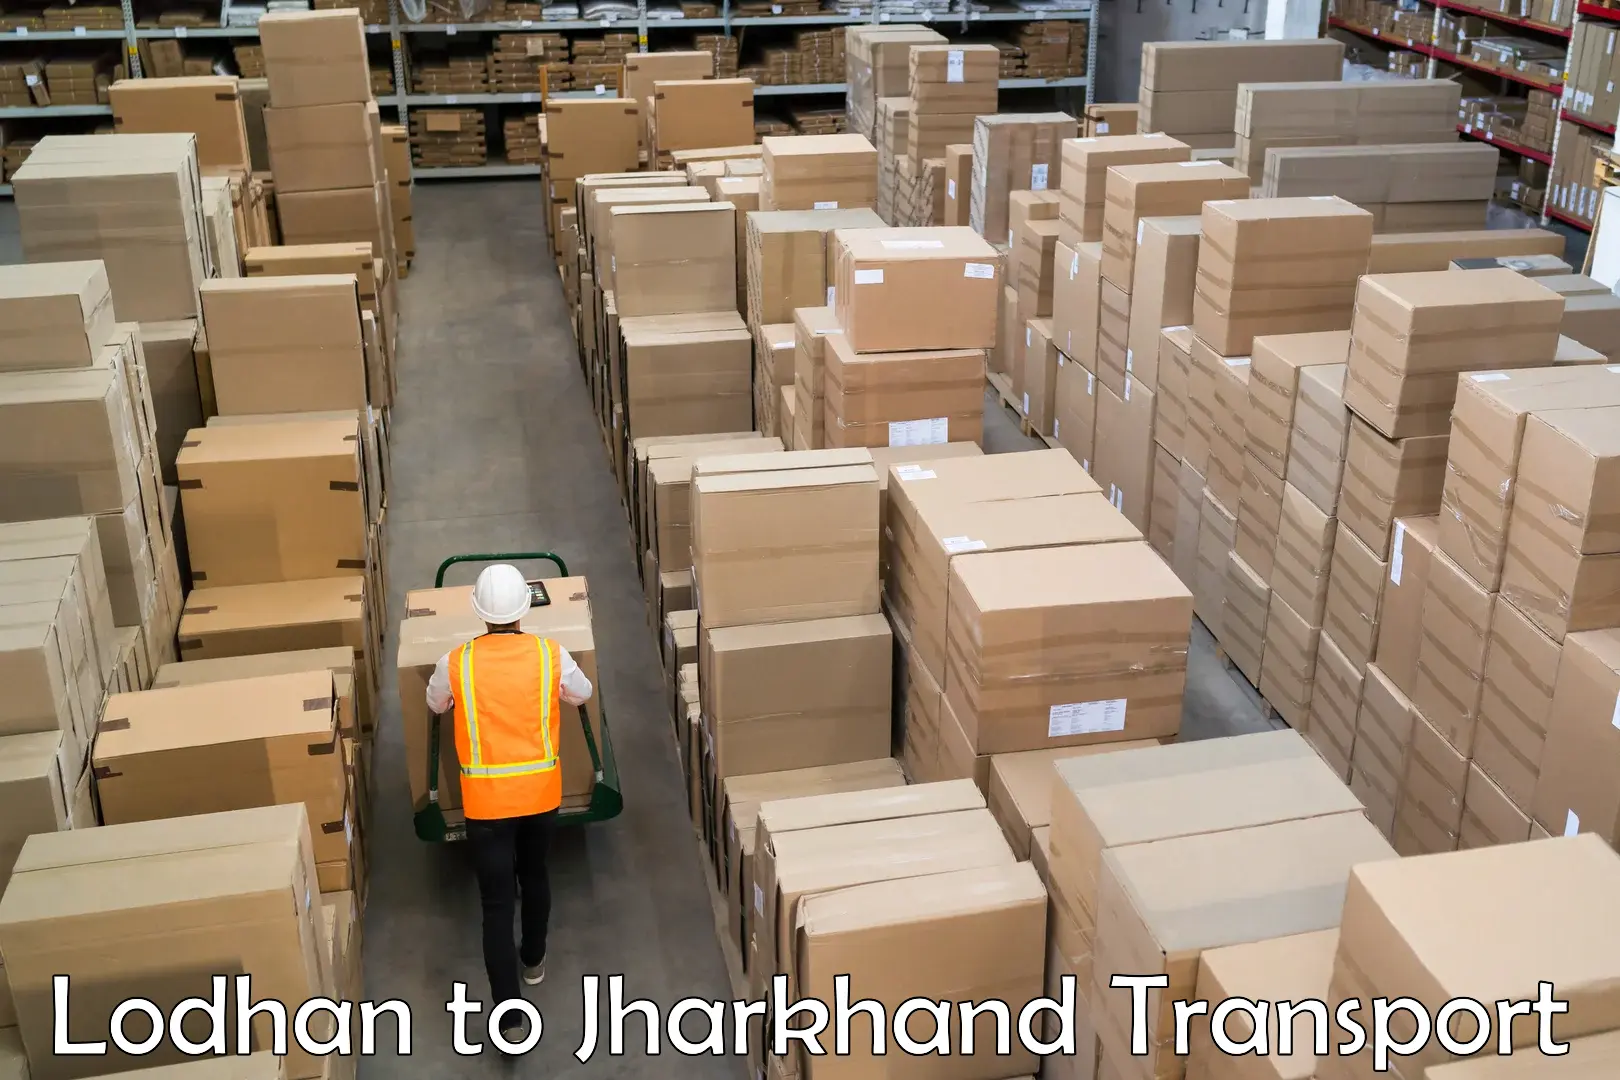 Nationwide transport services Lodhan to Godabar Chatra